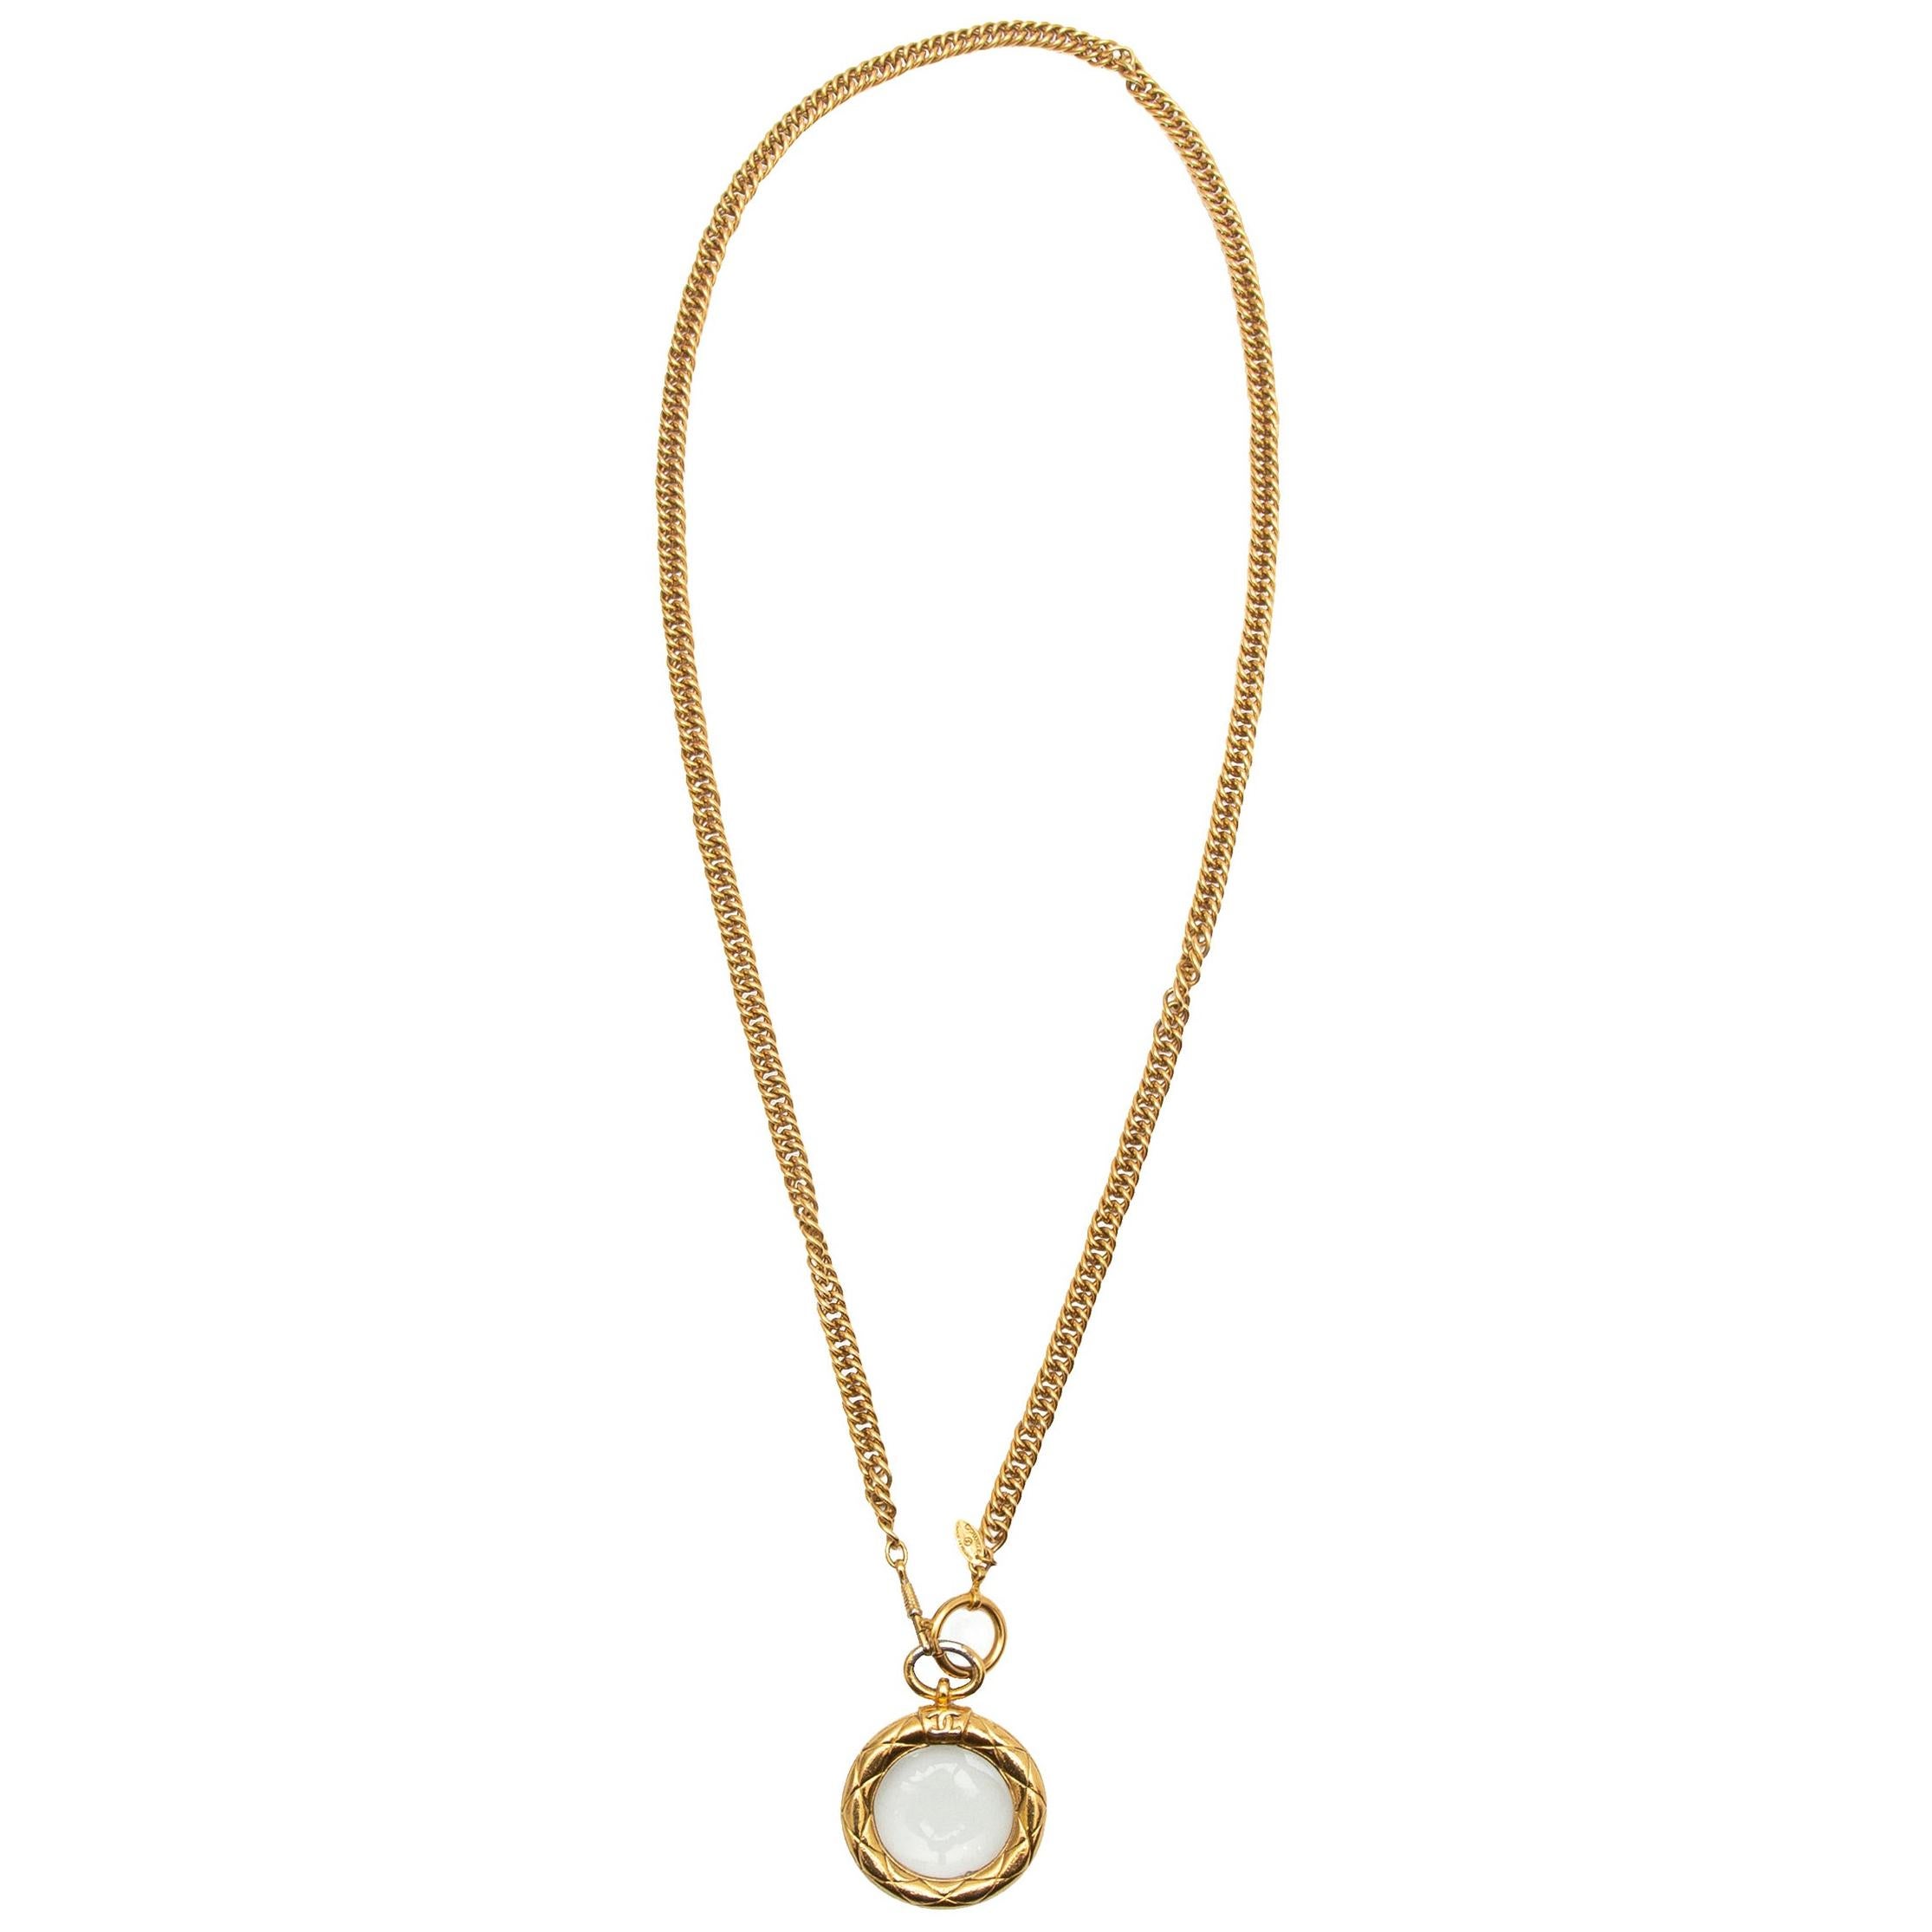 Chanel Gold 1980s Magnifying Glass Necklace